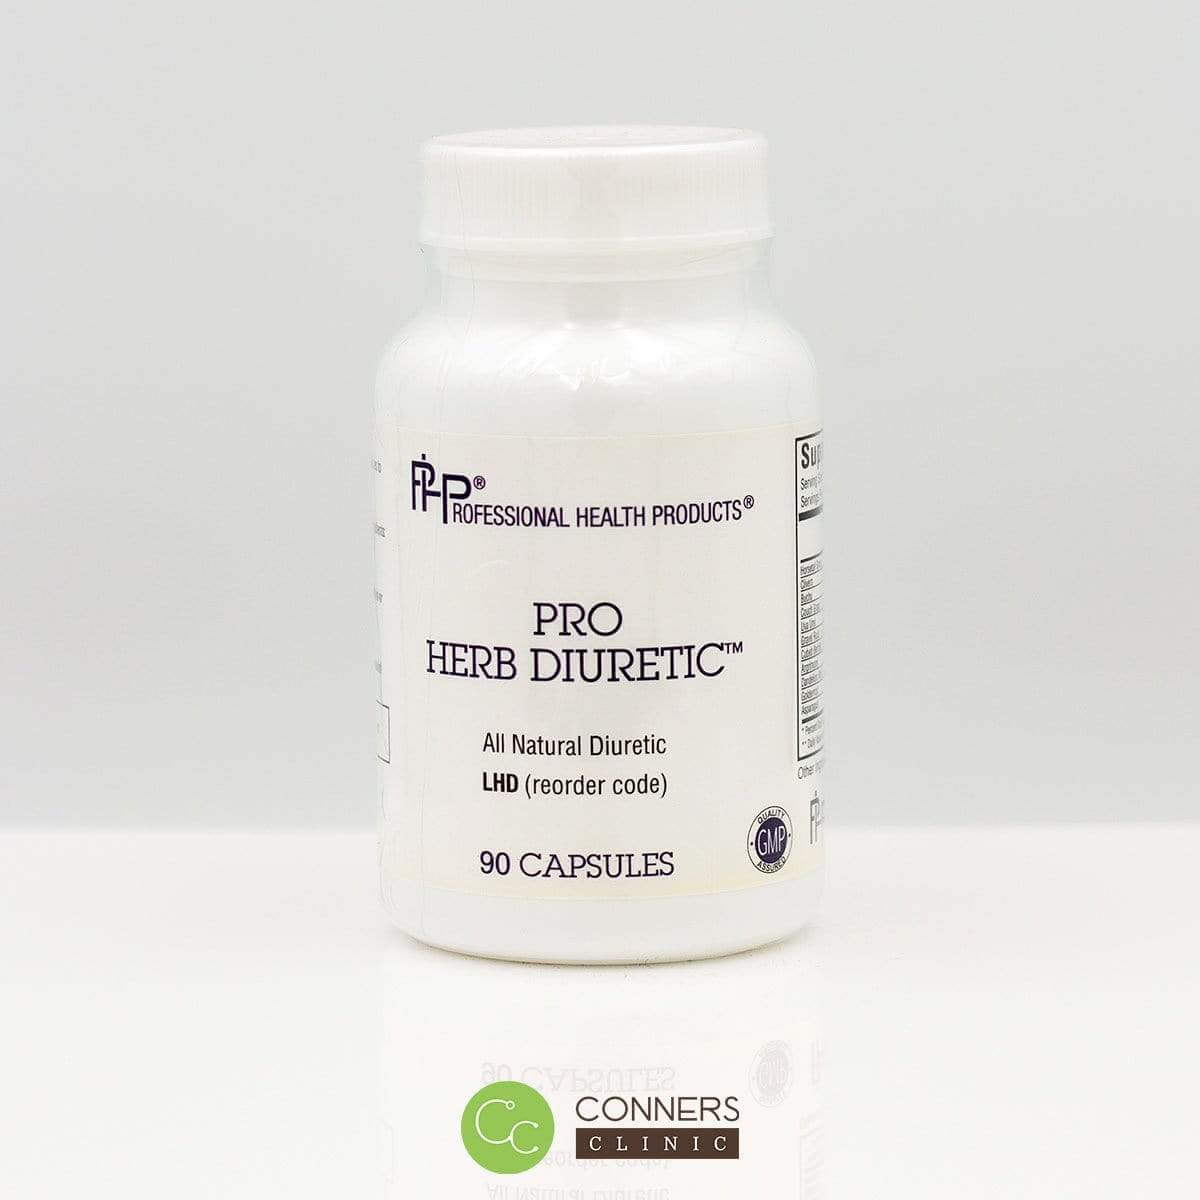 Pro Herb Diuretic - 90 Caps Prof Health Products Supplement - Conners Clinic